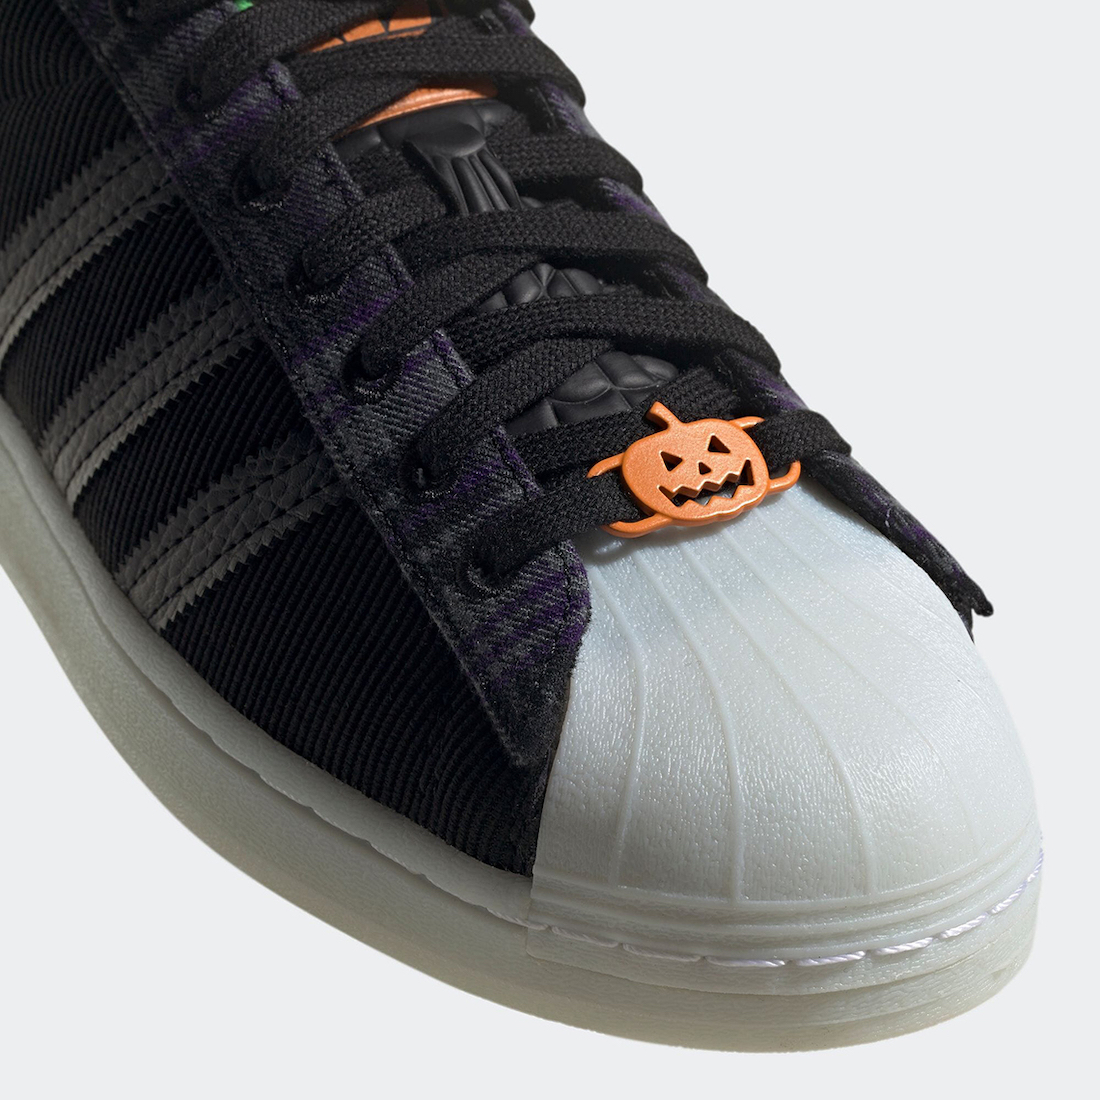 Official Photos of the adidas Superstar “Halloween” Sneakers Cartel